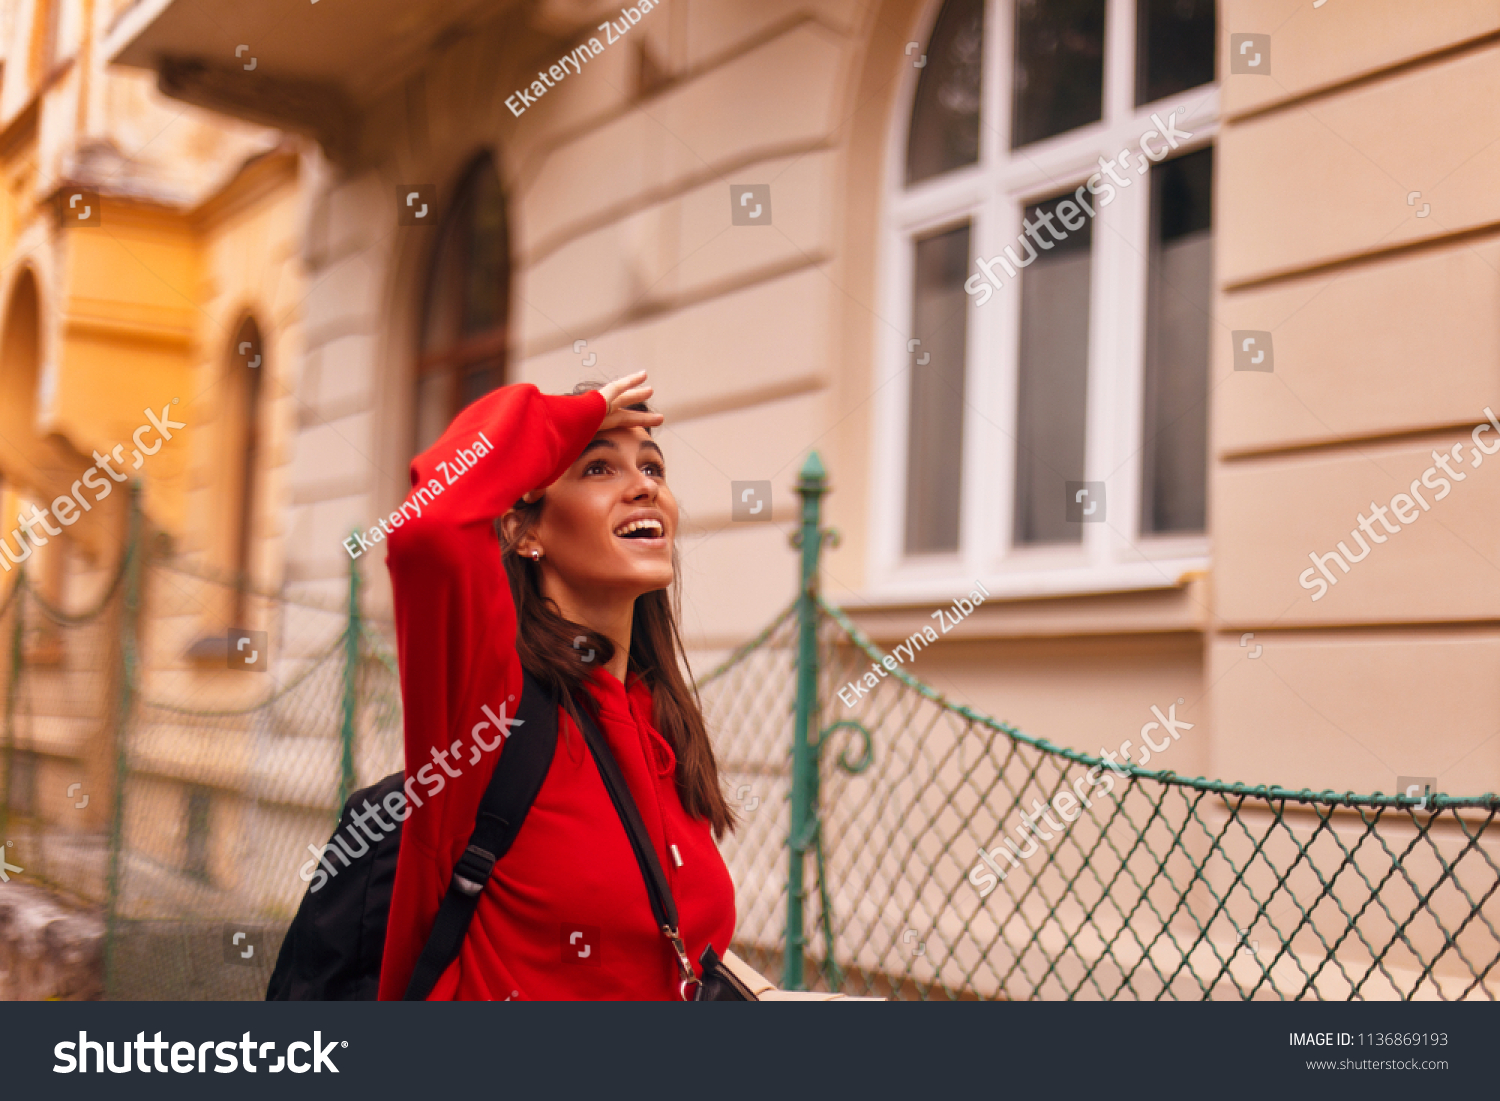 happy tourist woman walking on the street with nice architecture. brunette girl is looking at something. wearing red hoodie and with packed black bag #1136869193